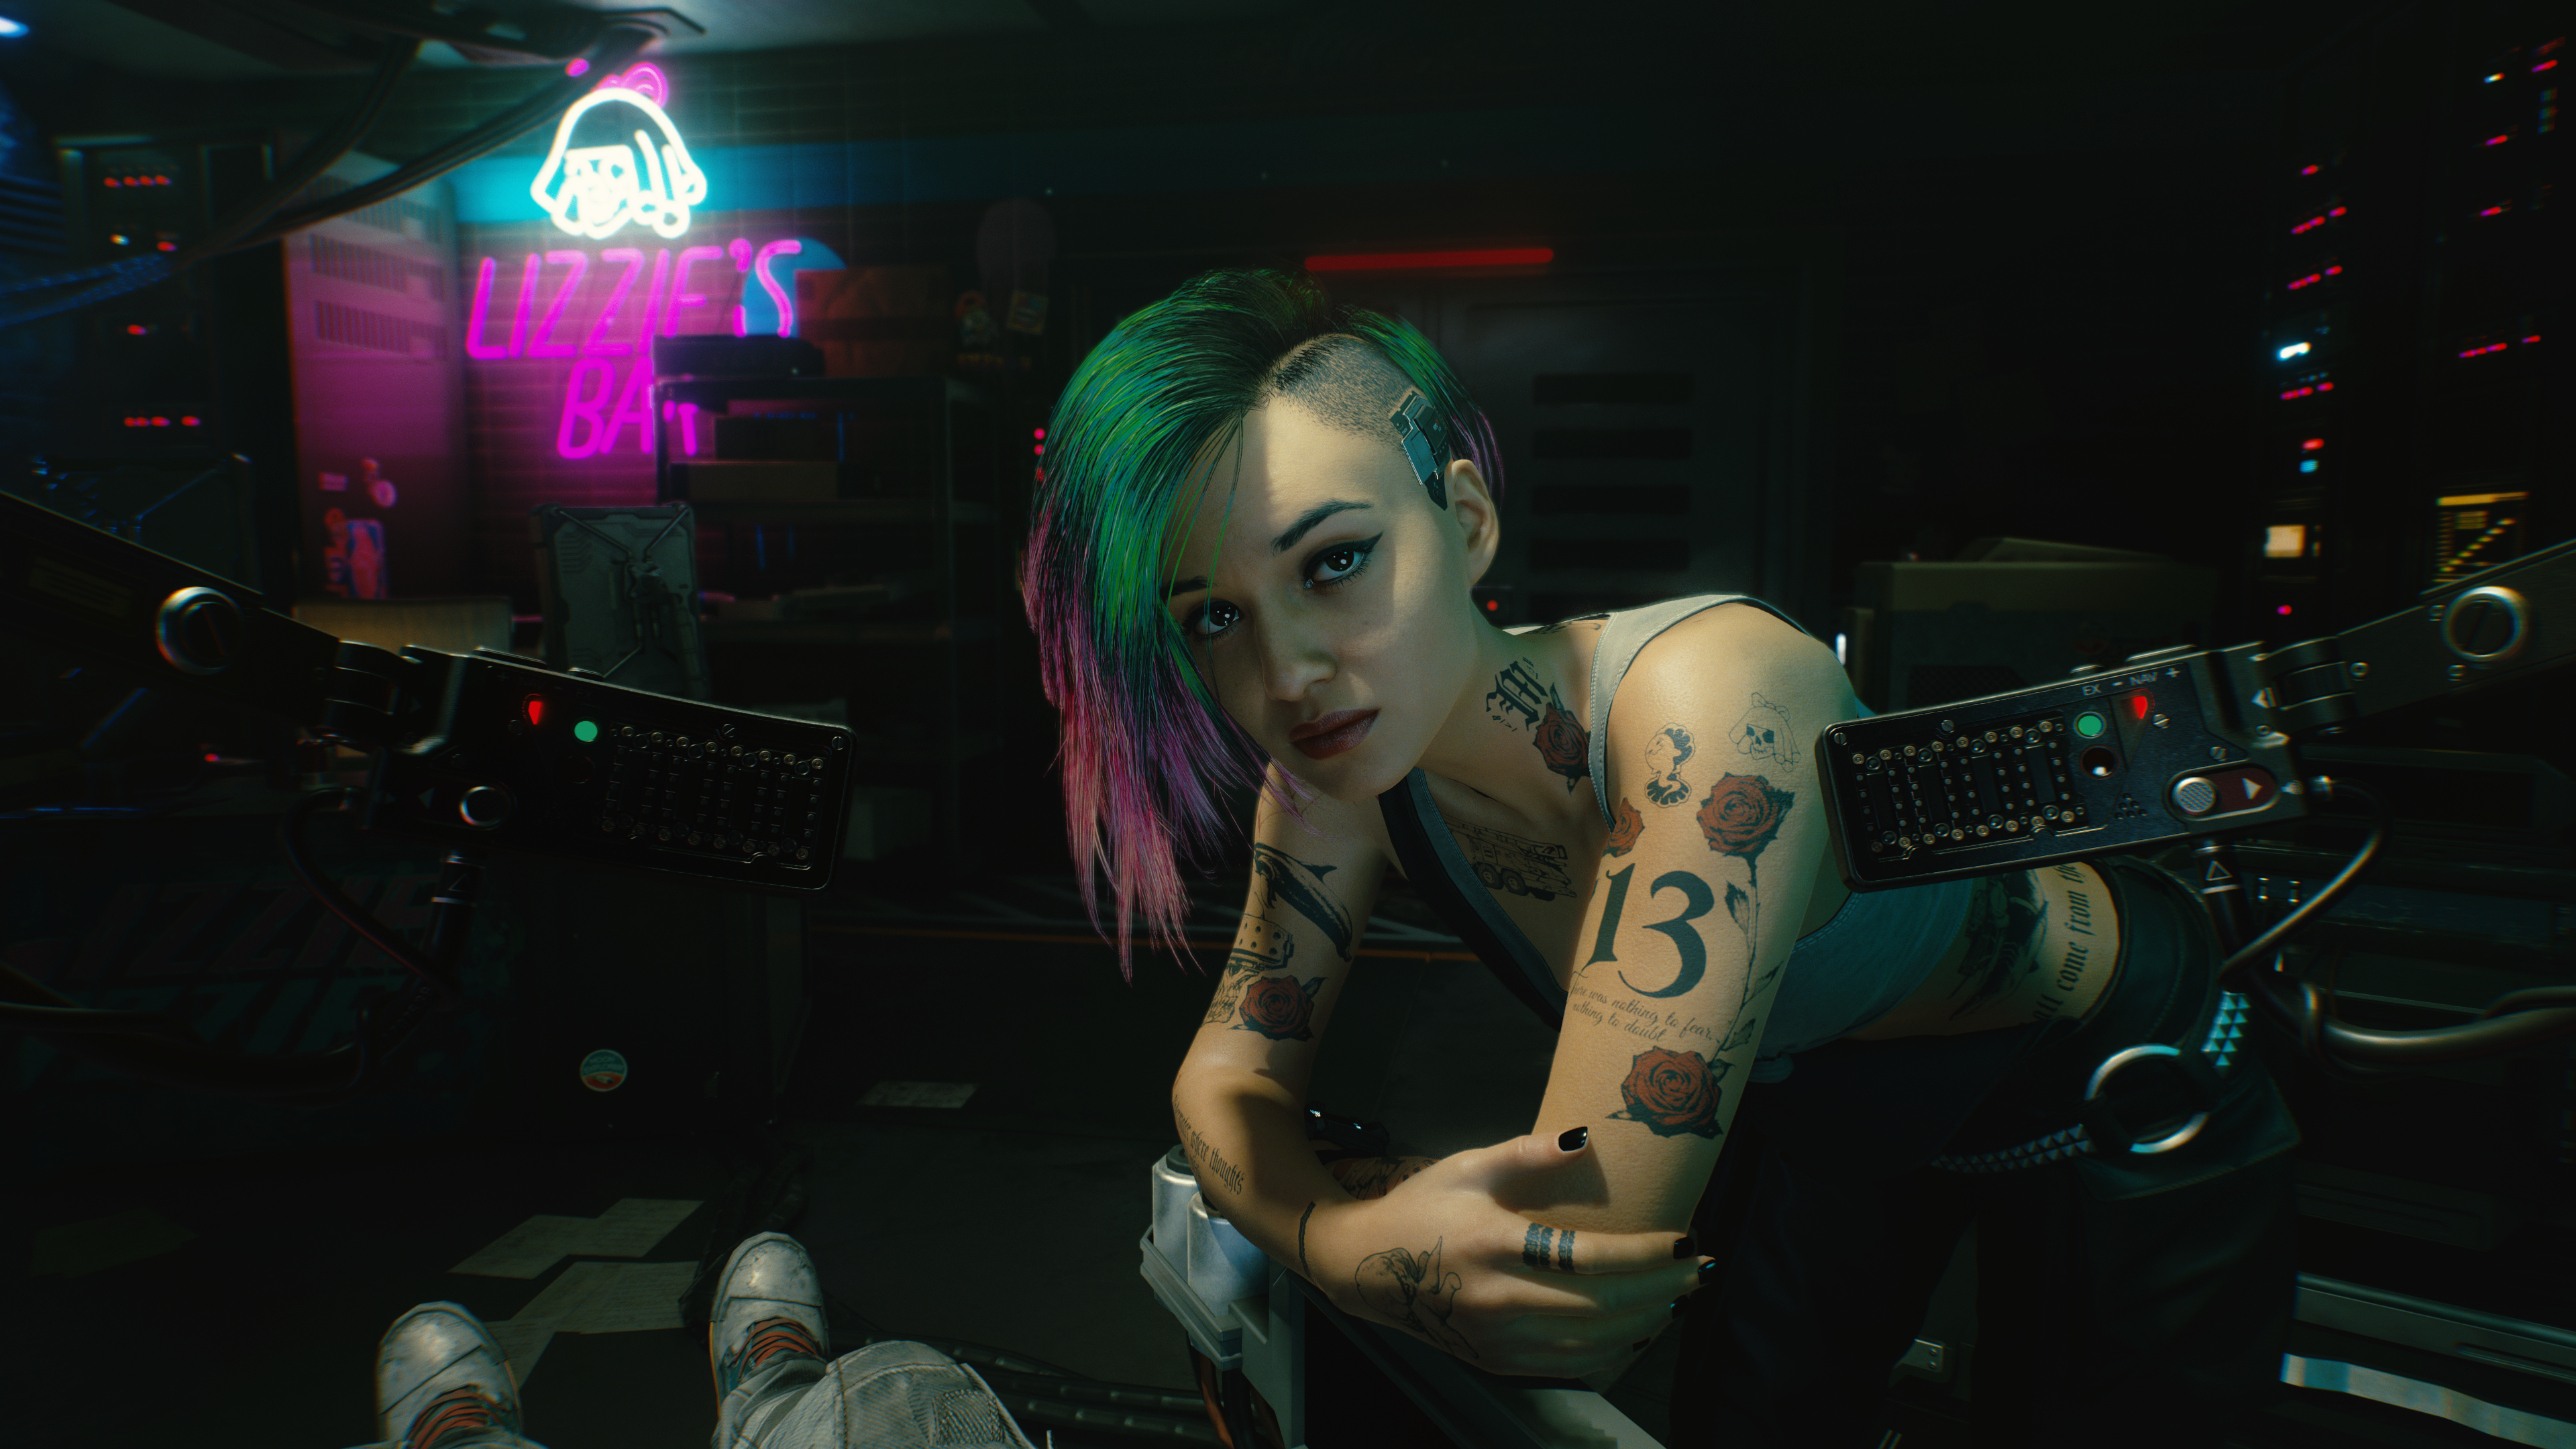 Image for DF Direct: Cyberpunk 2077 - New Gameplay Reaction + Graphics Analysis - Is This Next-Gen?